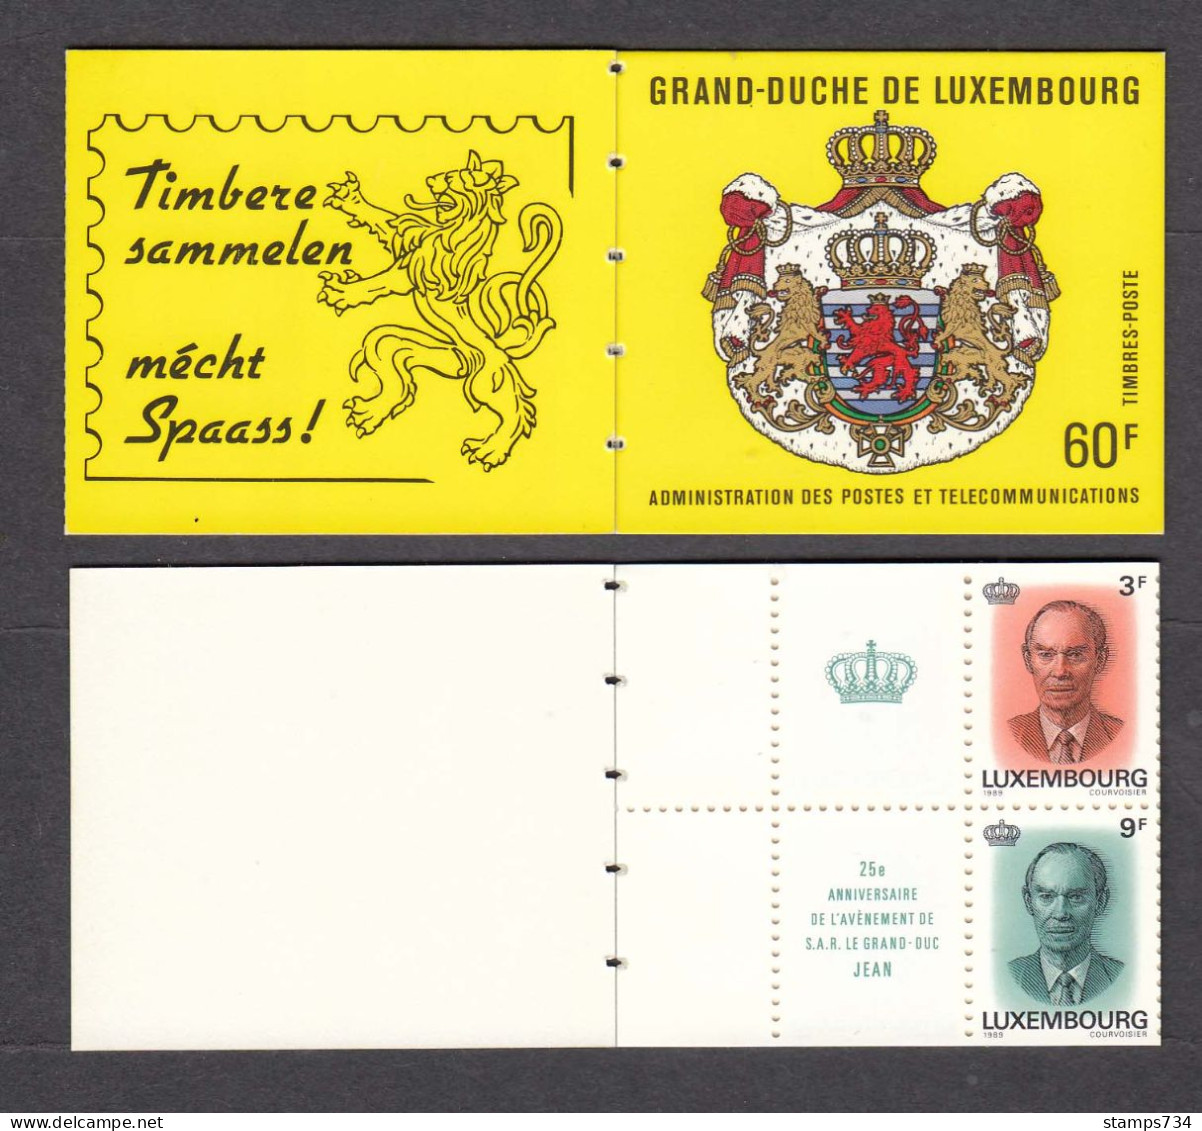 Luxembourg 1989 - Grand-Duc Jean, Michel MH 2, MNH** - Booklets